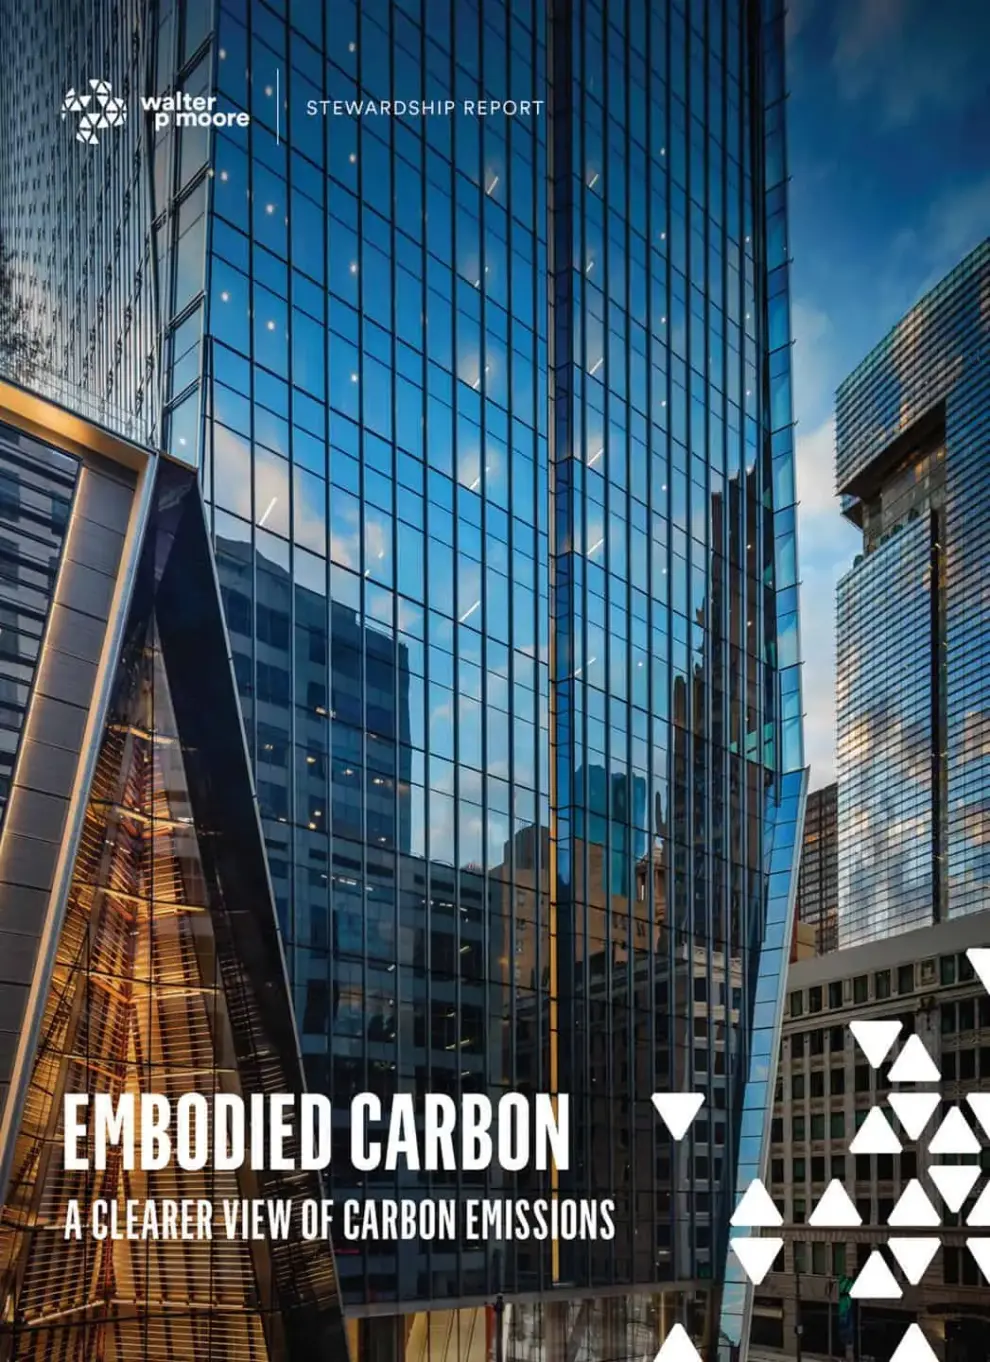 WALTER P MOORE RELEASES EMBODIED CARBON STEWARDSHIP REPORT